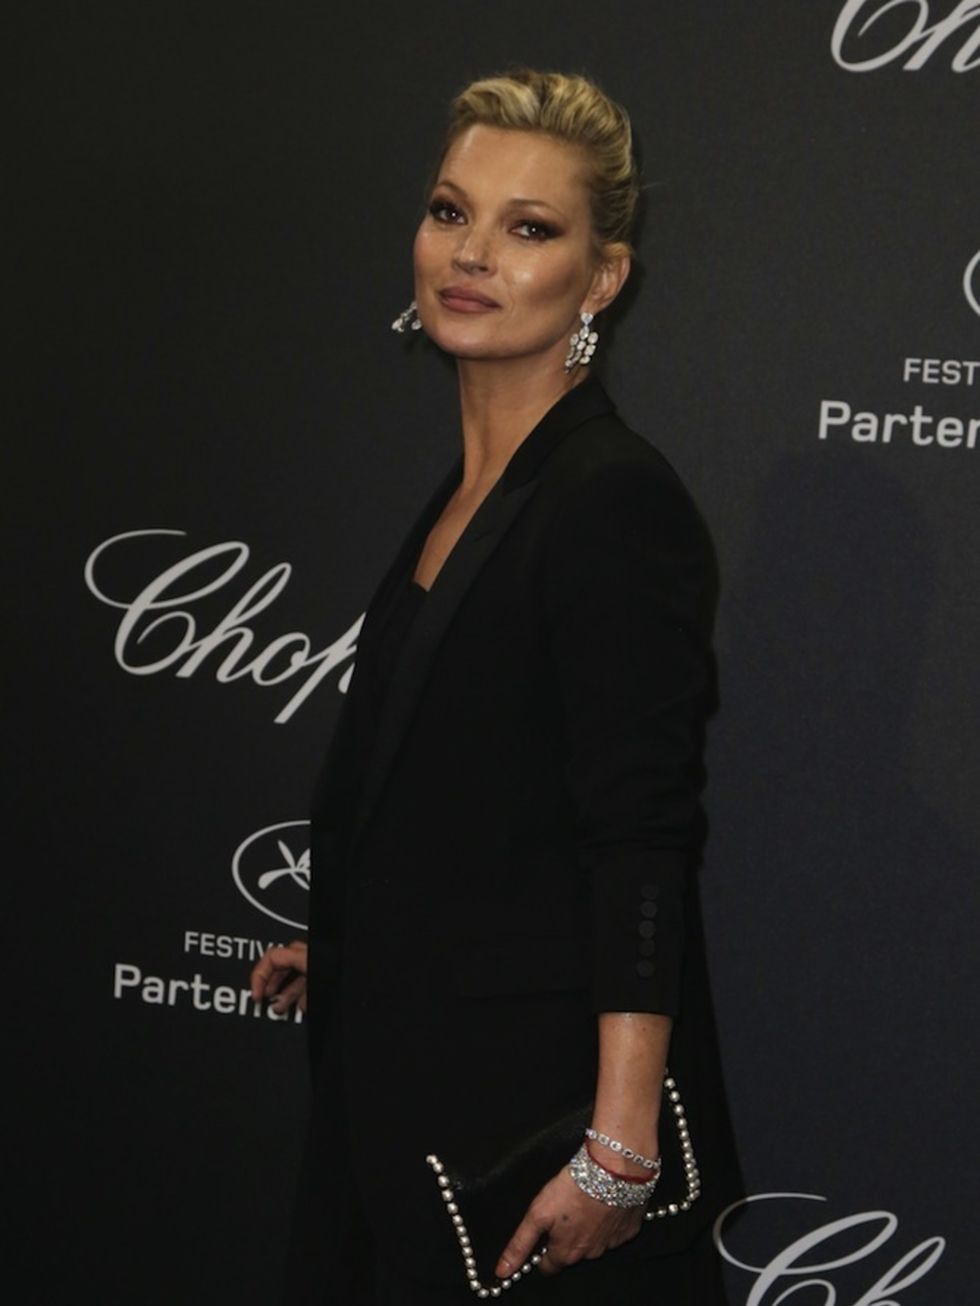 Kate Moss attends Chopard Wild Party as part of The 69th Annual Cannes Film Festival